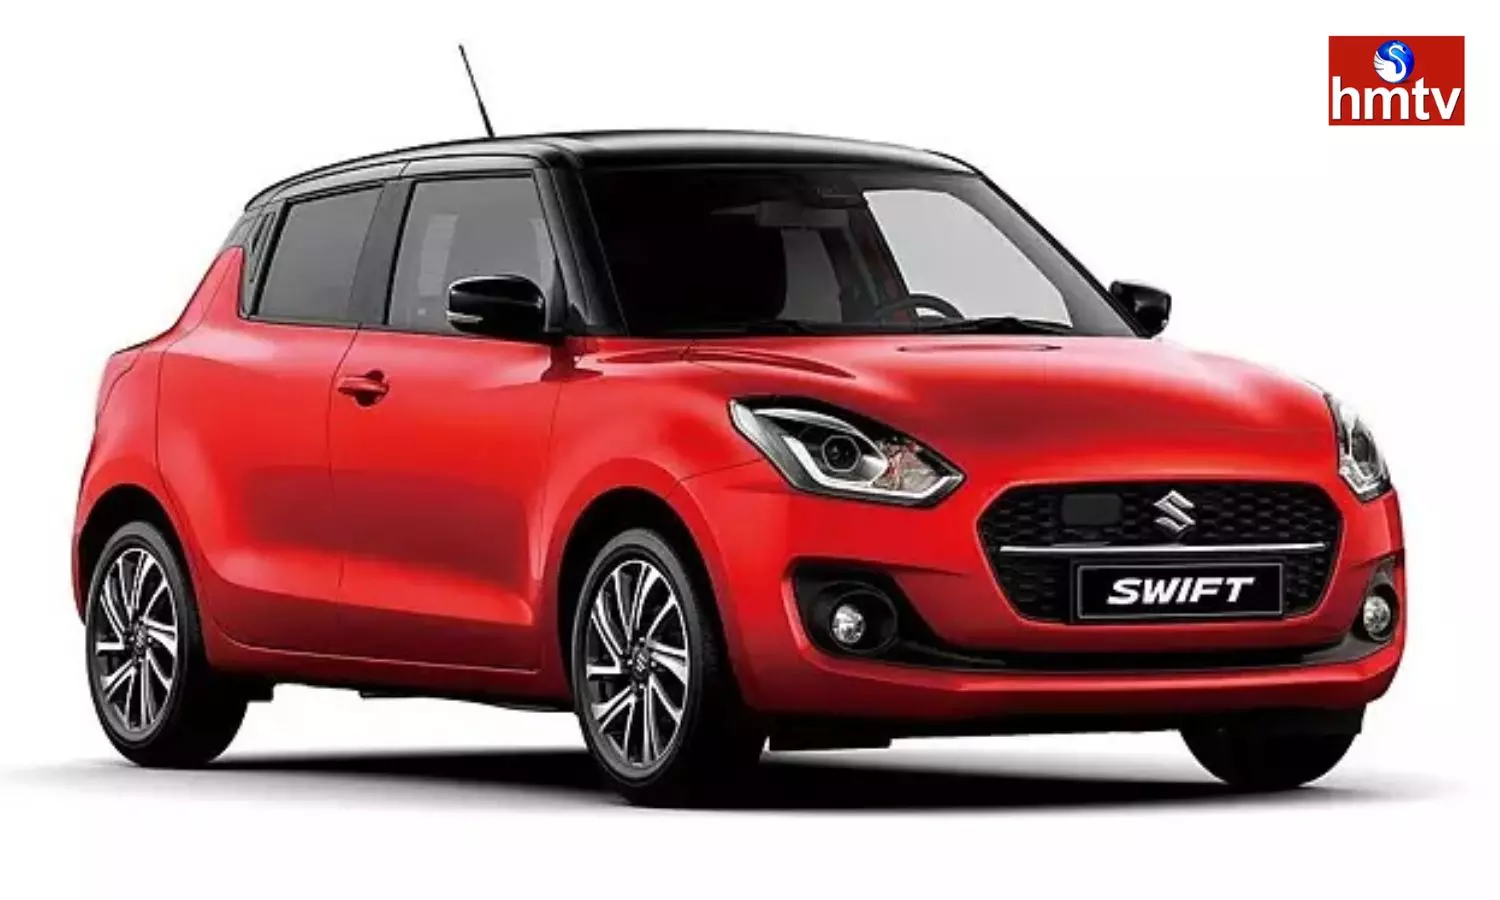 Maruti Suzuki Swift sold a total of 20,598 units while Maruti Suzuki WagonR is the first place in sales